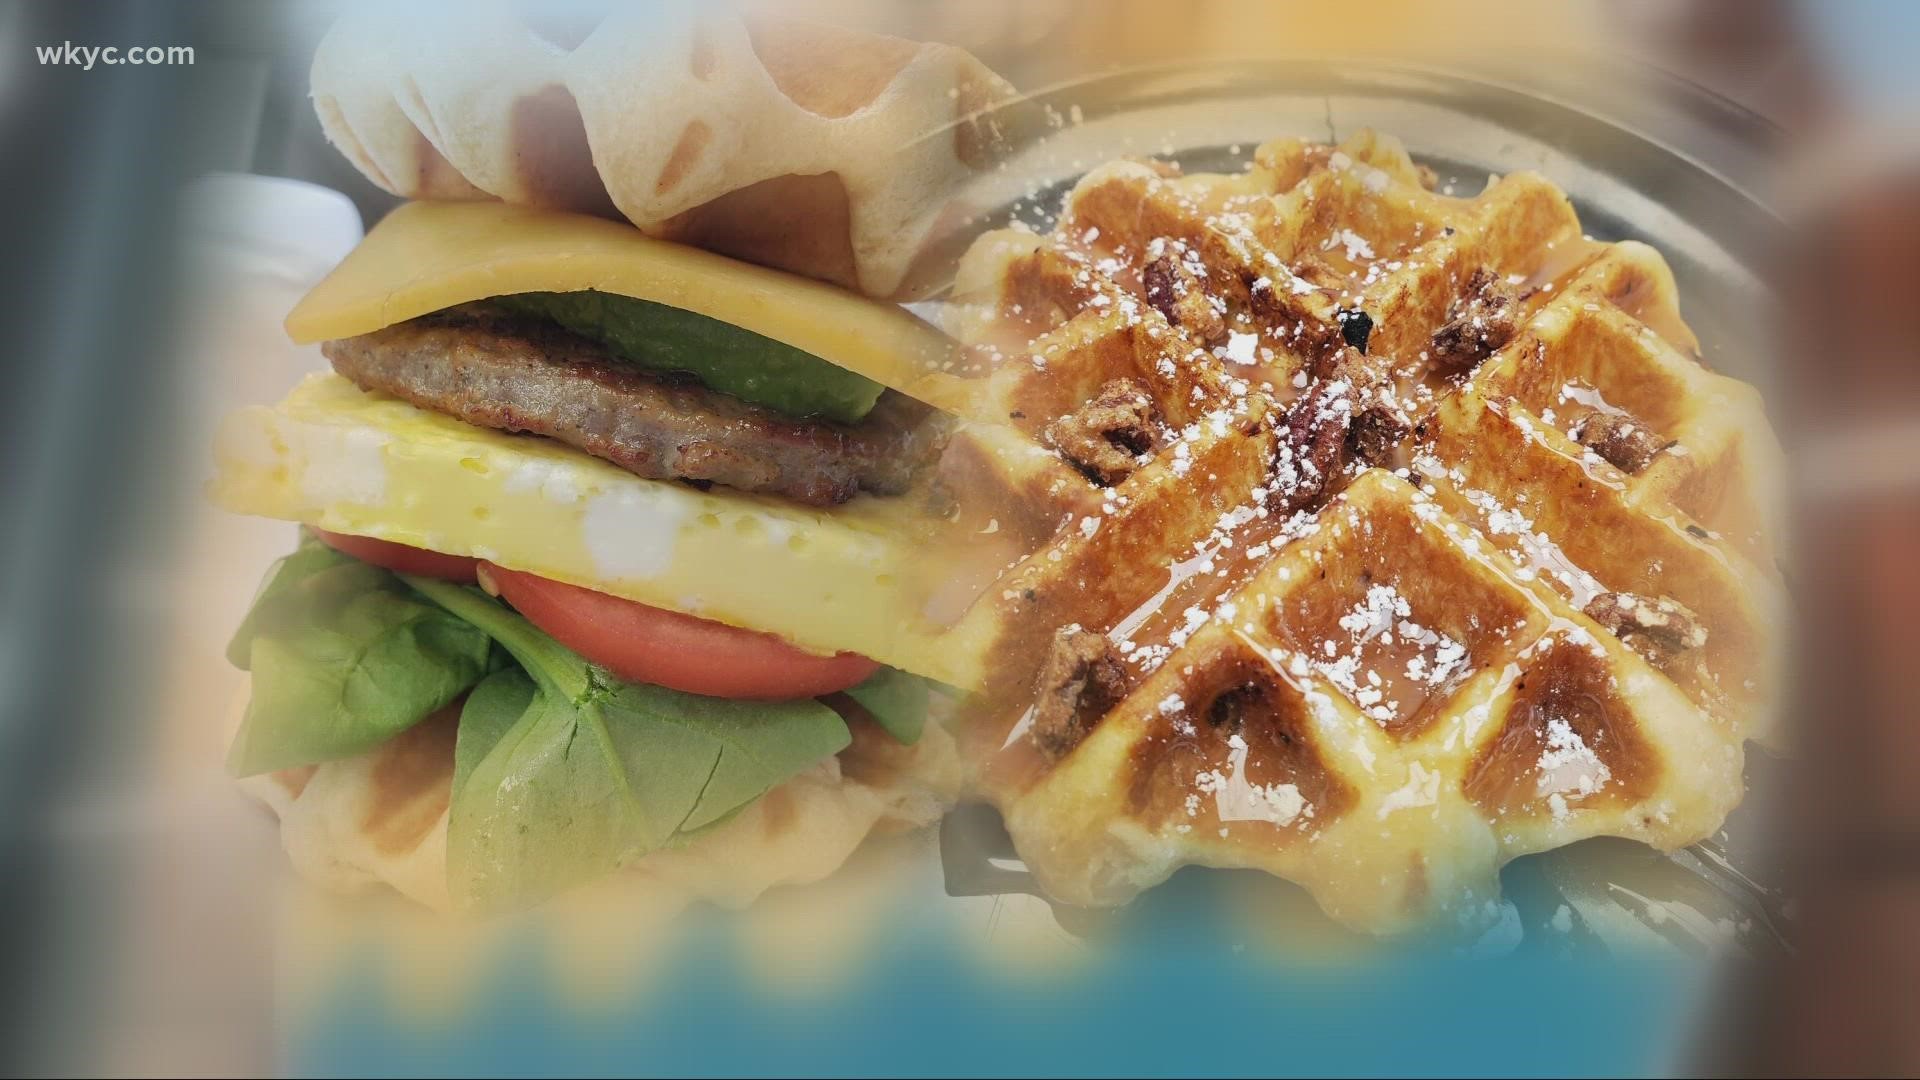 Wake up and Waffle is a place in Sandusky that takes waffles to the next level.